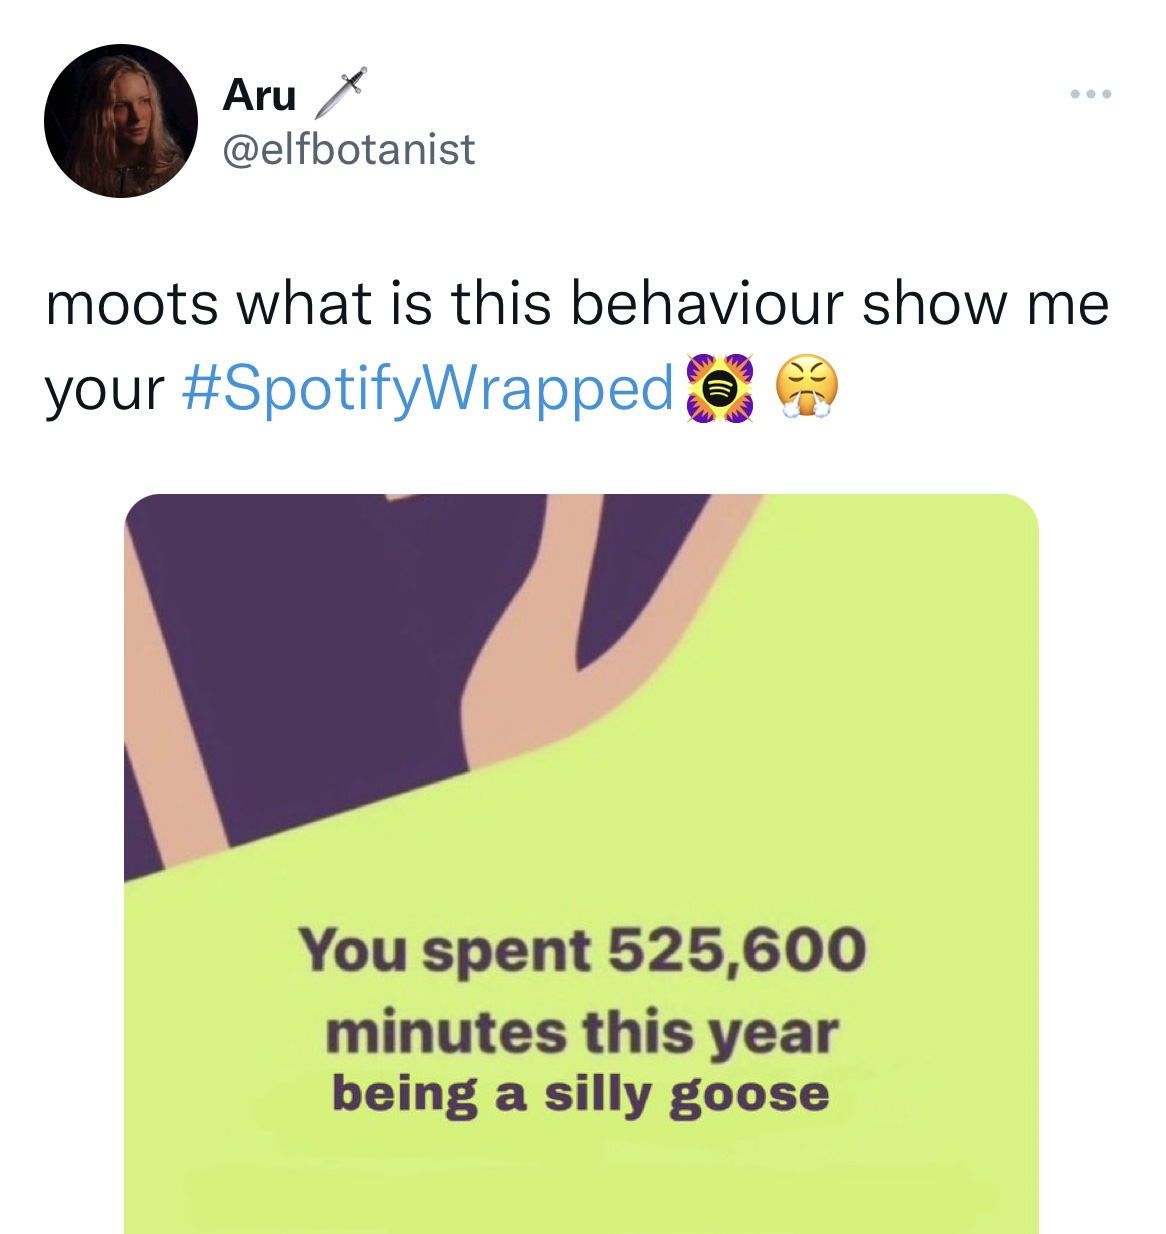 Spotify Wrapped Memes - urine colour chart - Aru X moots what is this behaviour show me your You spent 525,600 minutes this year being a silly goose